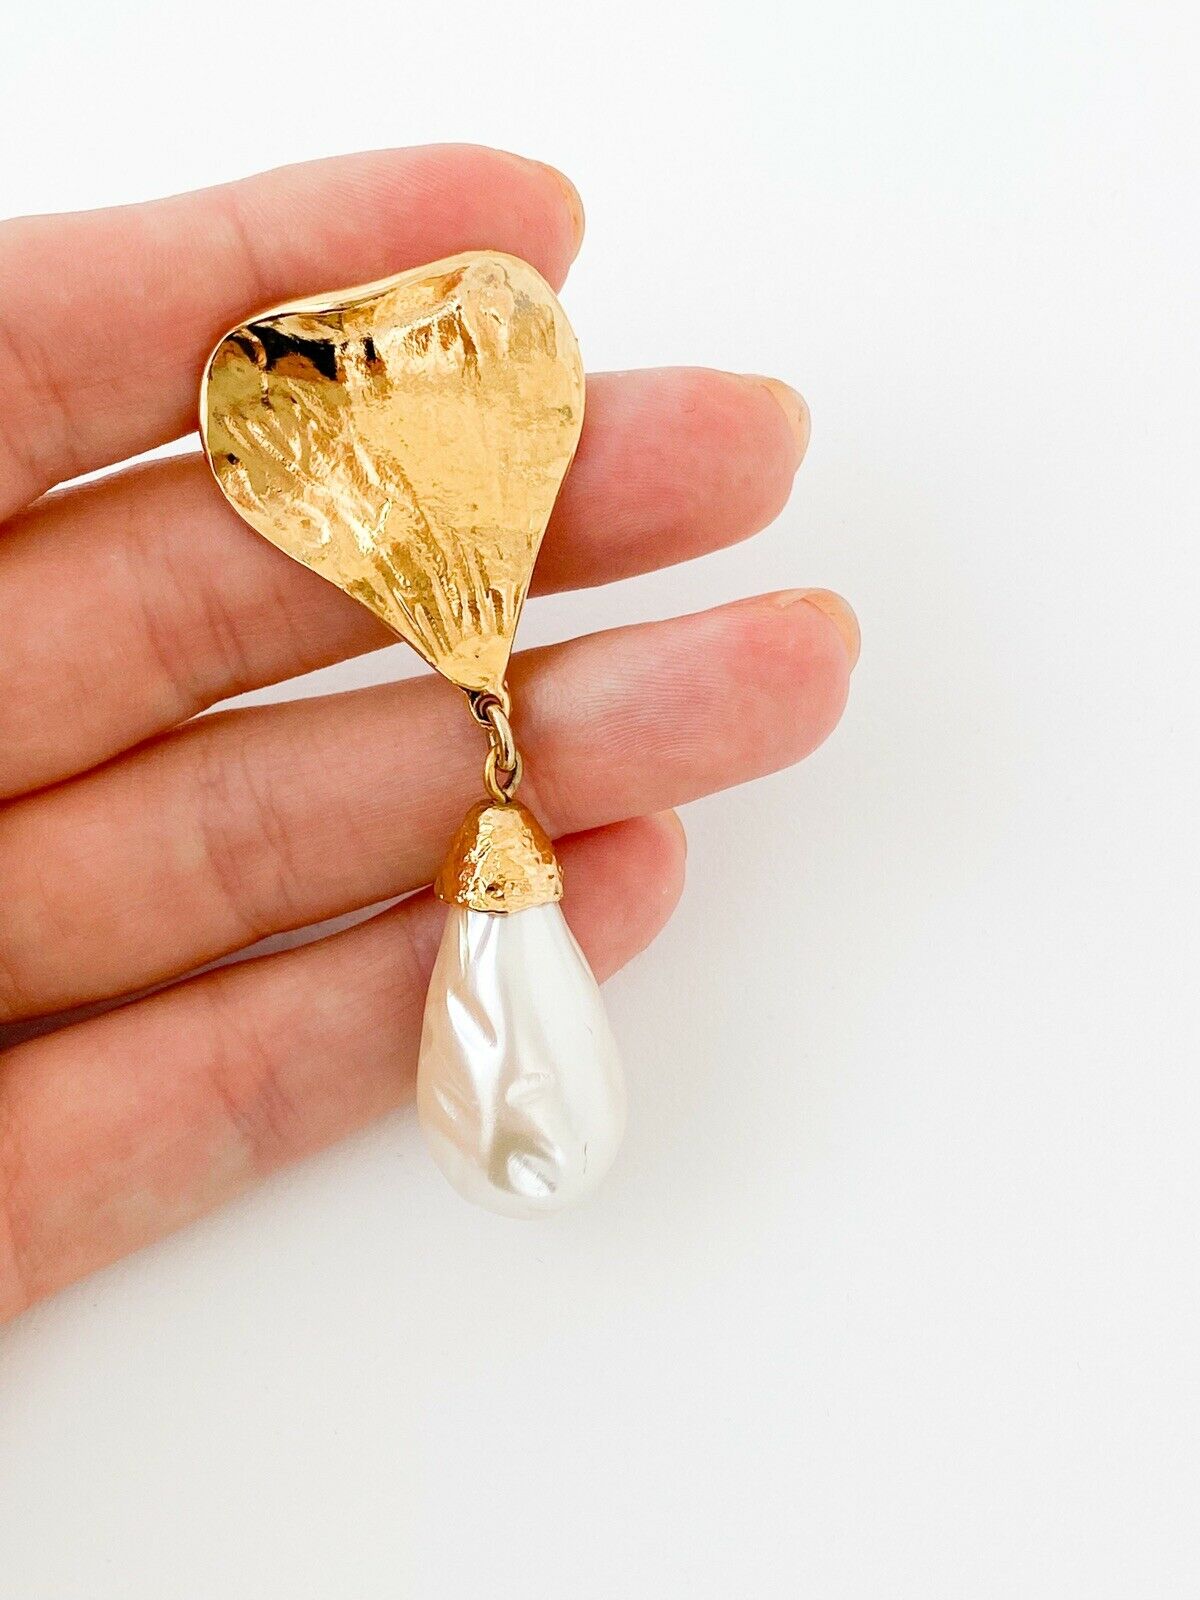 【SOLD OUT】YSL Yves Saint Laurent Vintage Gold Tone Heart Drop Brooch Pin Faux Pearl